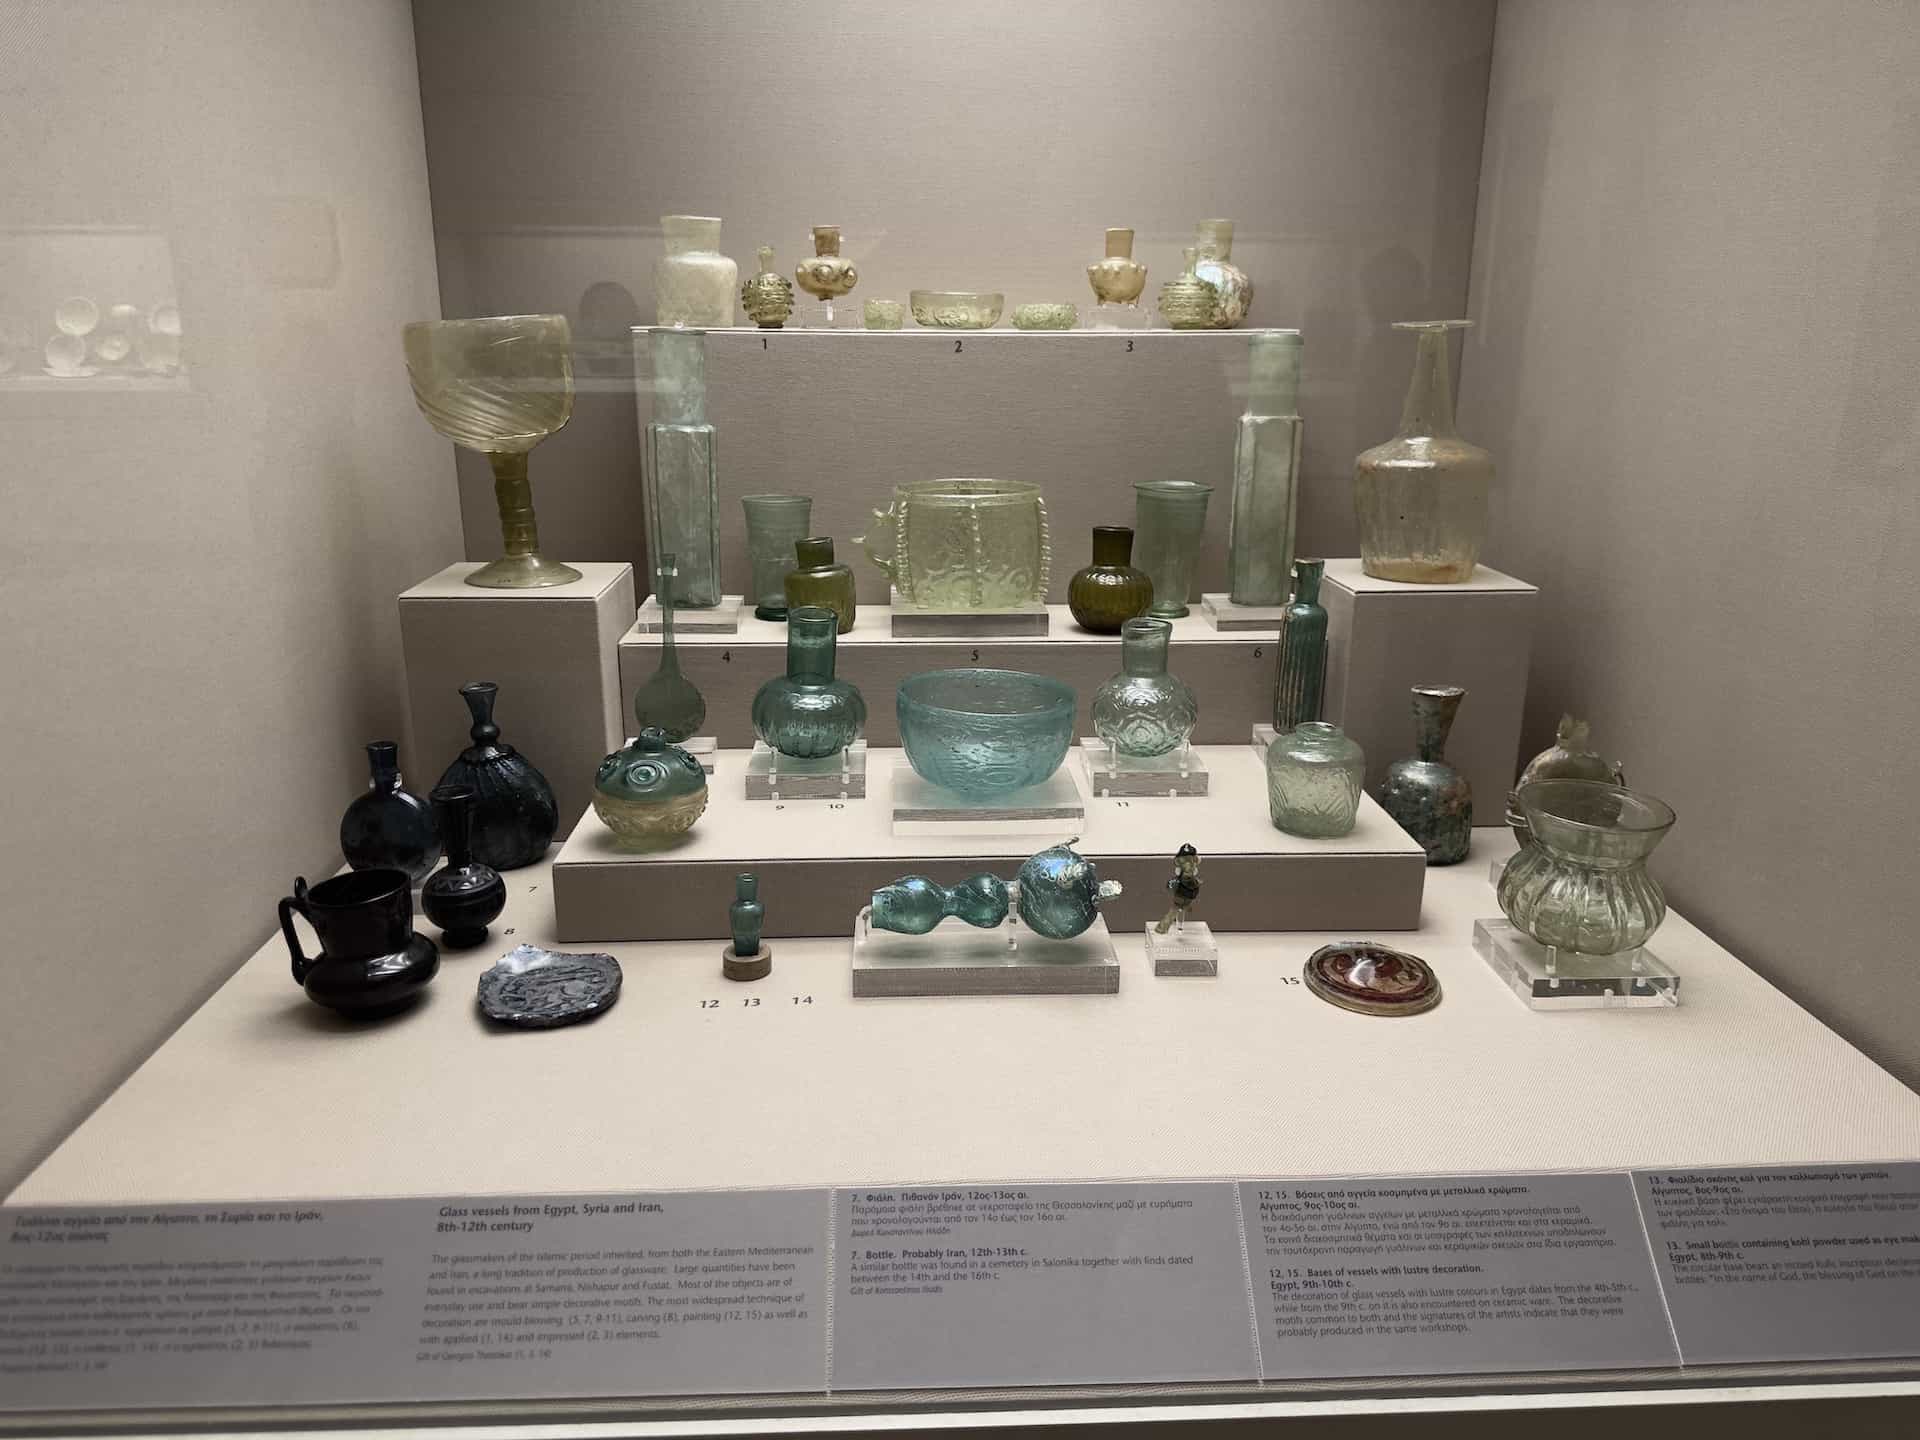 Glass vessels from Egypt, Syria and Iran, 8th-12th century at the Benaki Museum of Islamic Art in Athens, Greece